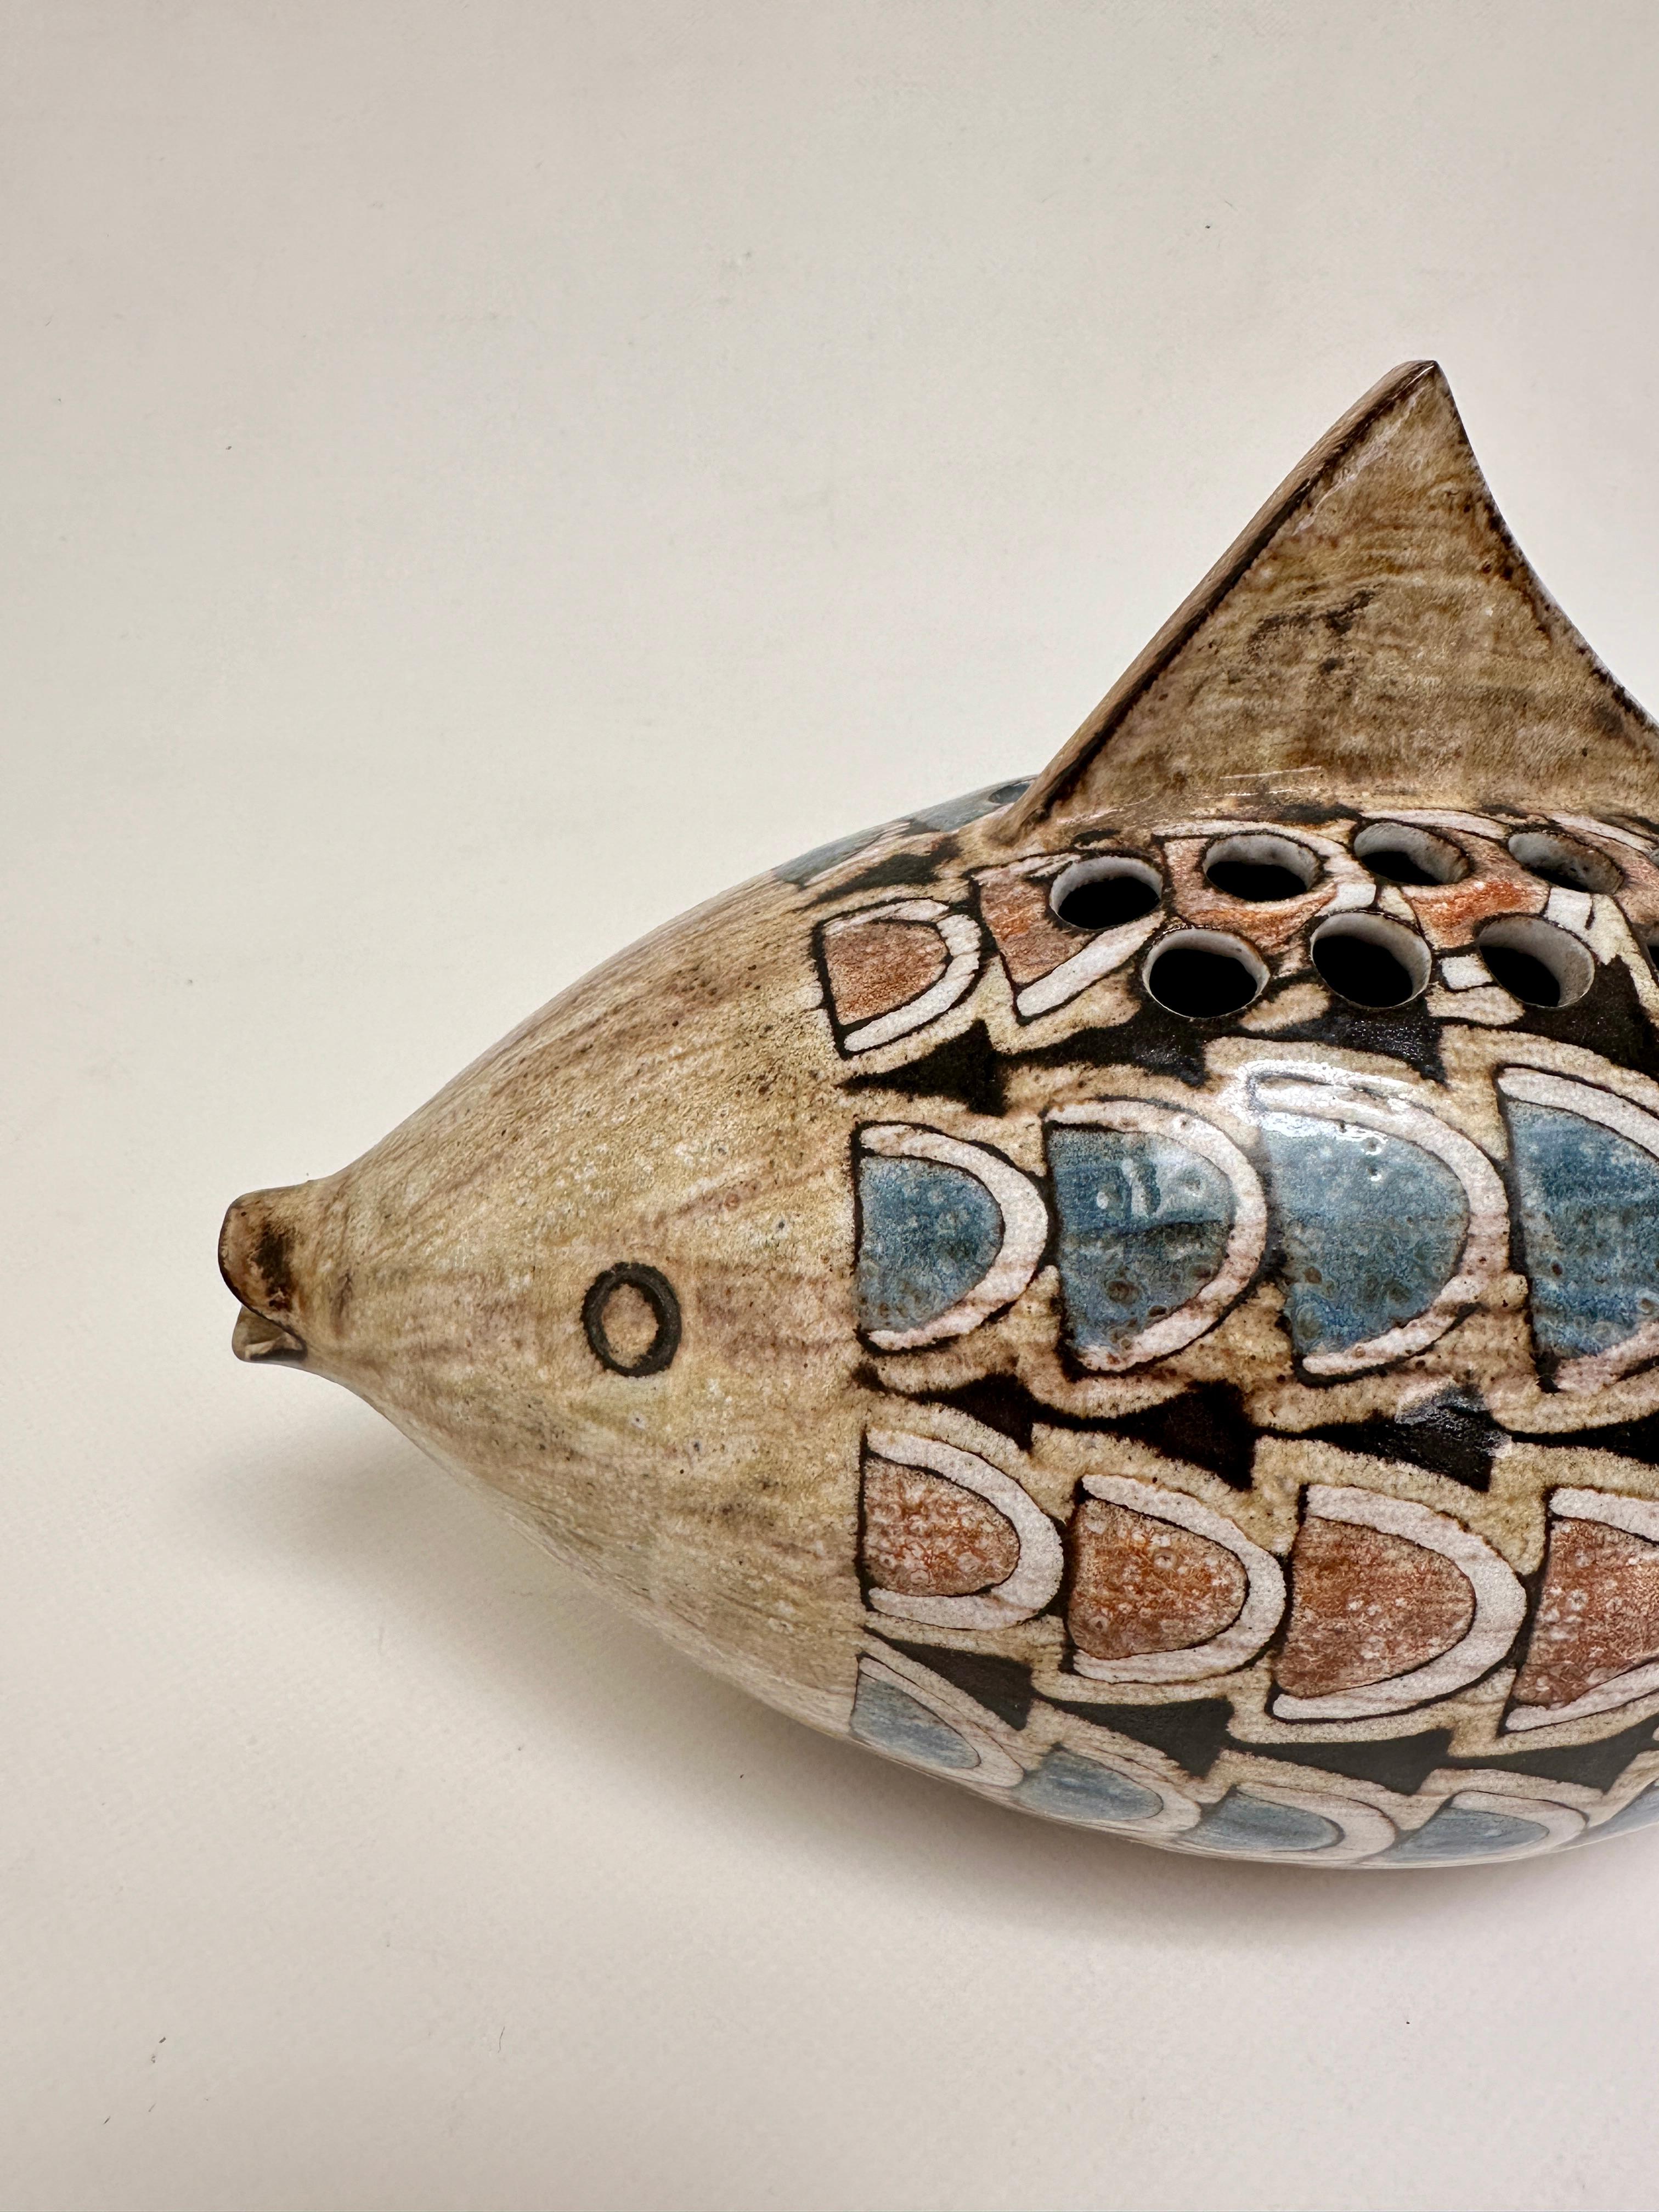 Garden vase in the shape of a fish in red earth from Vallauris, glazes in muted tones and patterns evoking oriental decorative ceramics.

Graduated of the Ecole des Beaux Arts in Reims, Jean-Claude Malarmey joined his classmate Robert Perot in 1954